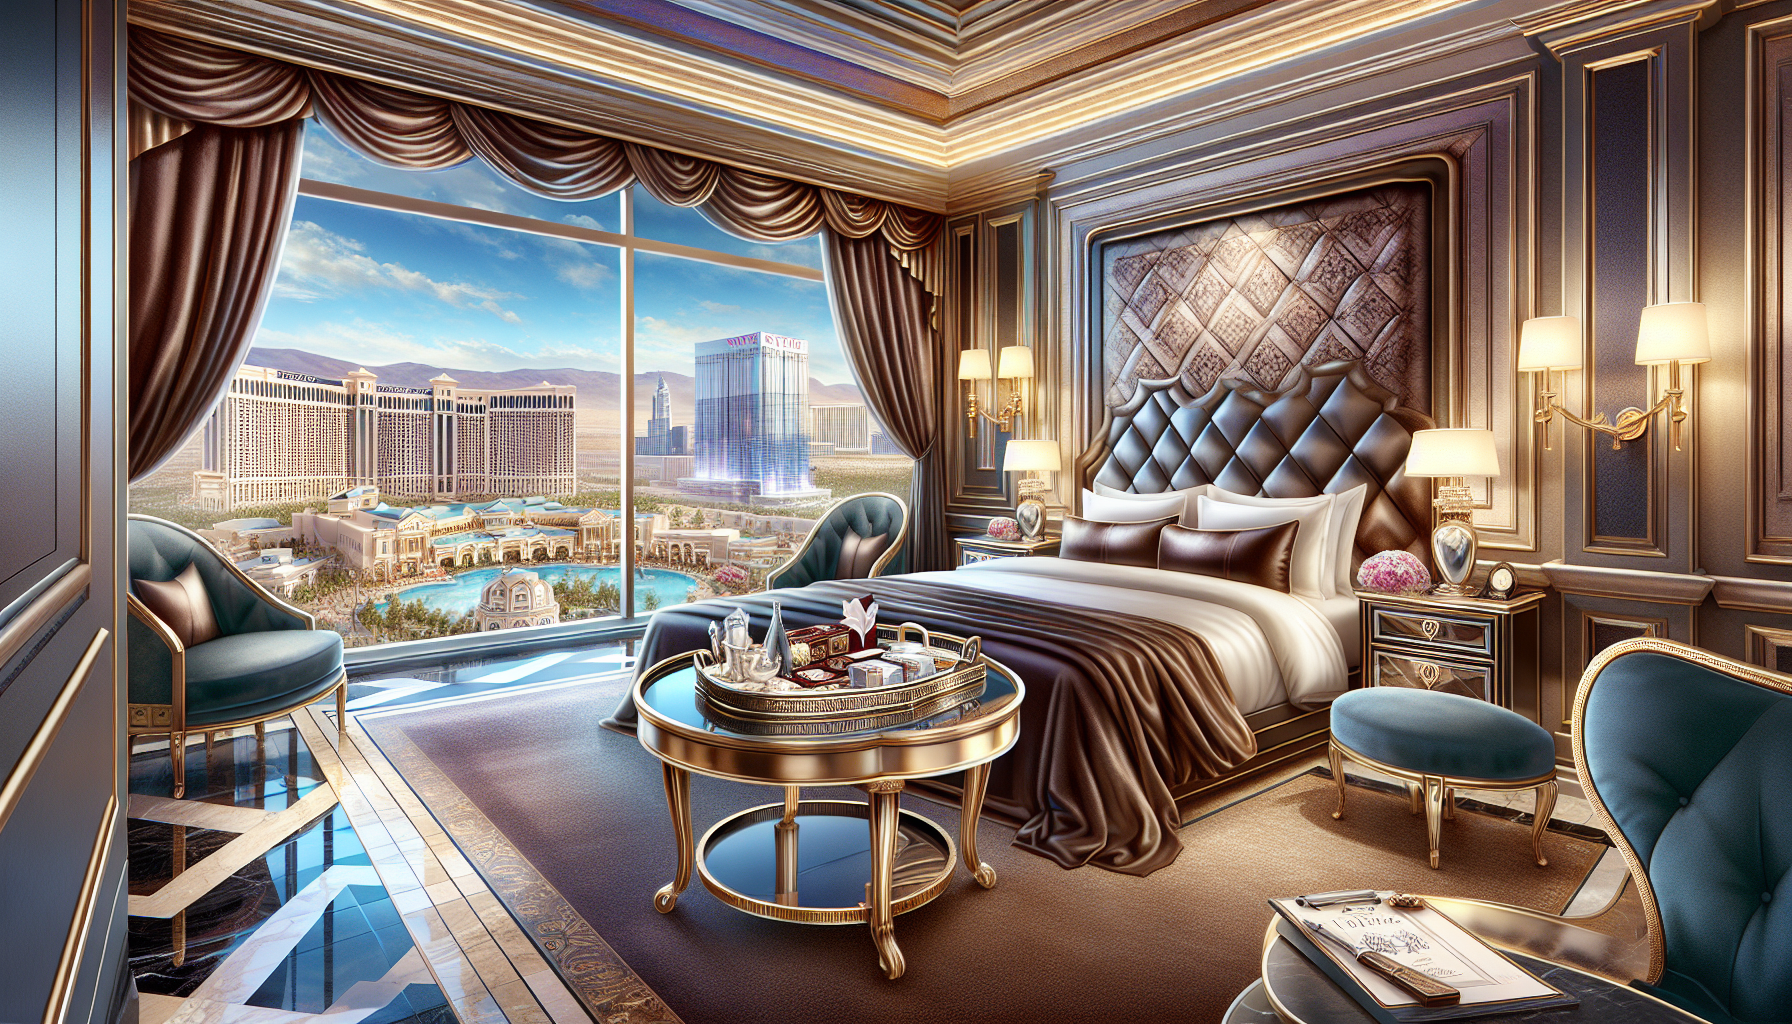 Creative illustration of a luxurious hotel suite with VIP amenities